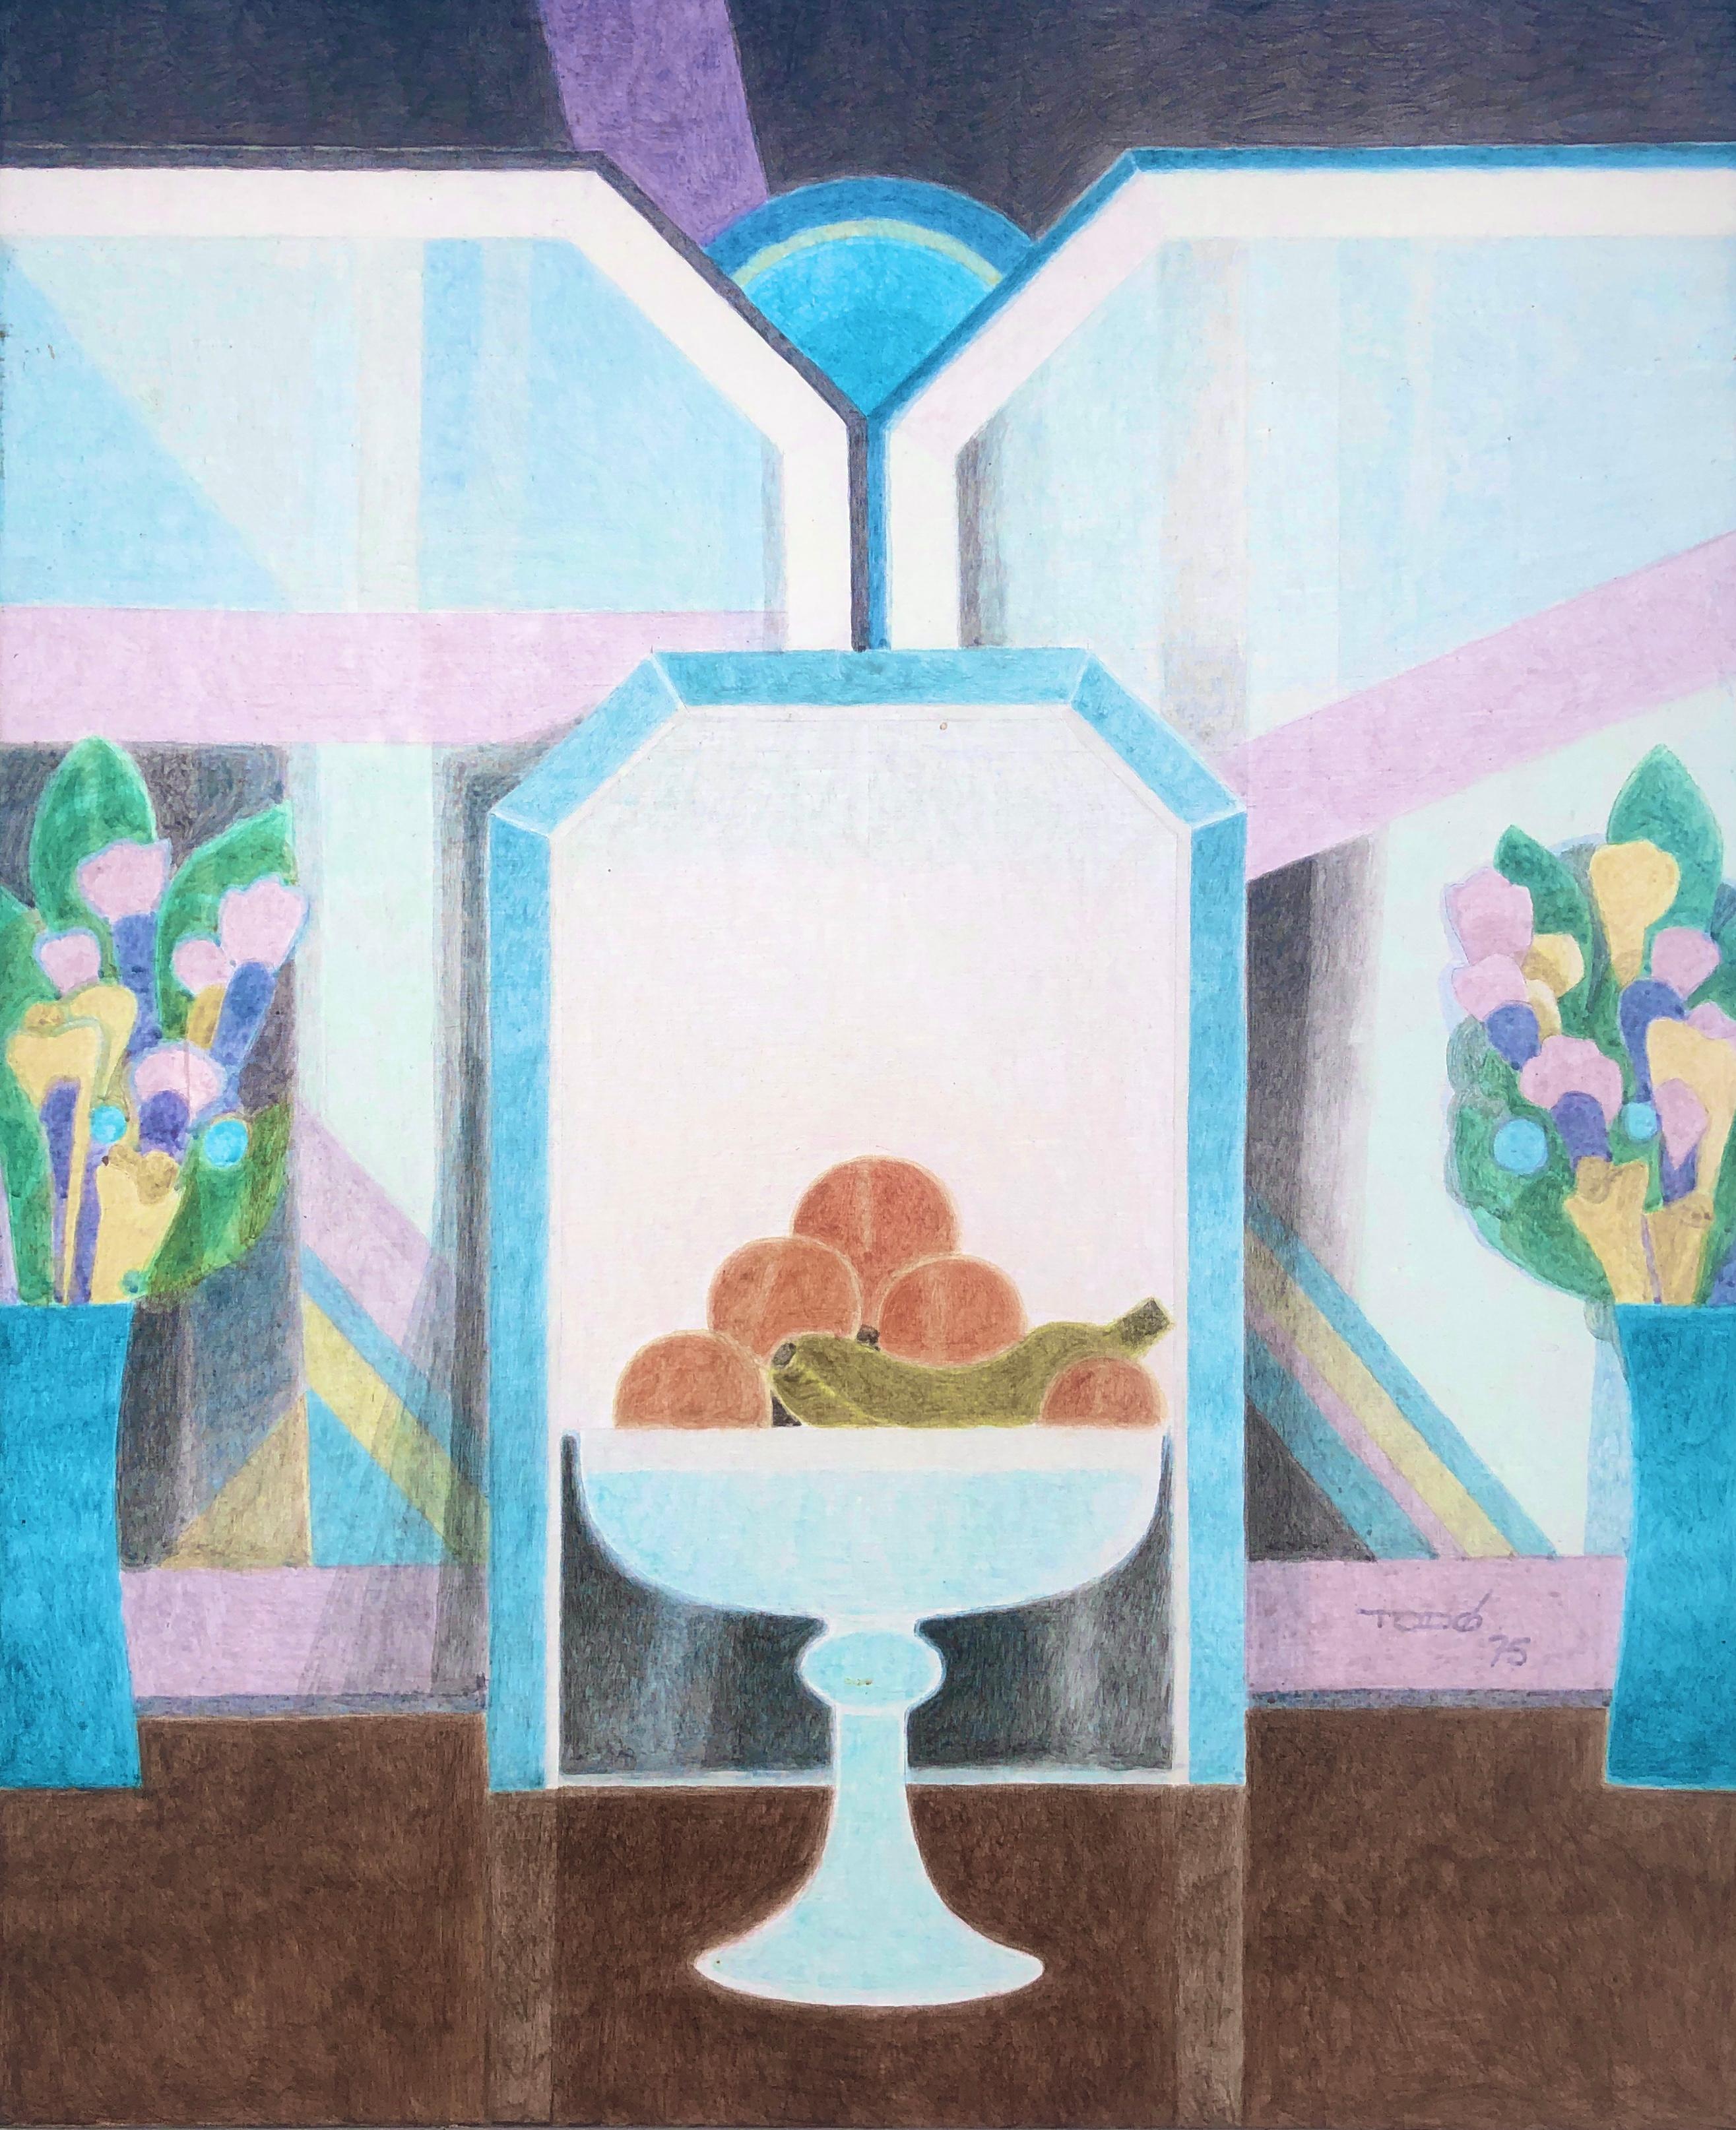 Symmetrical and mirror in the center oil on canvas painting still life